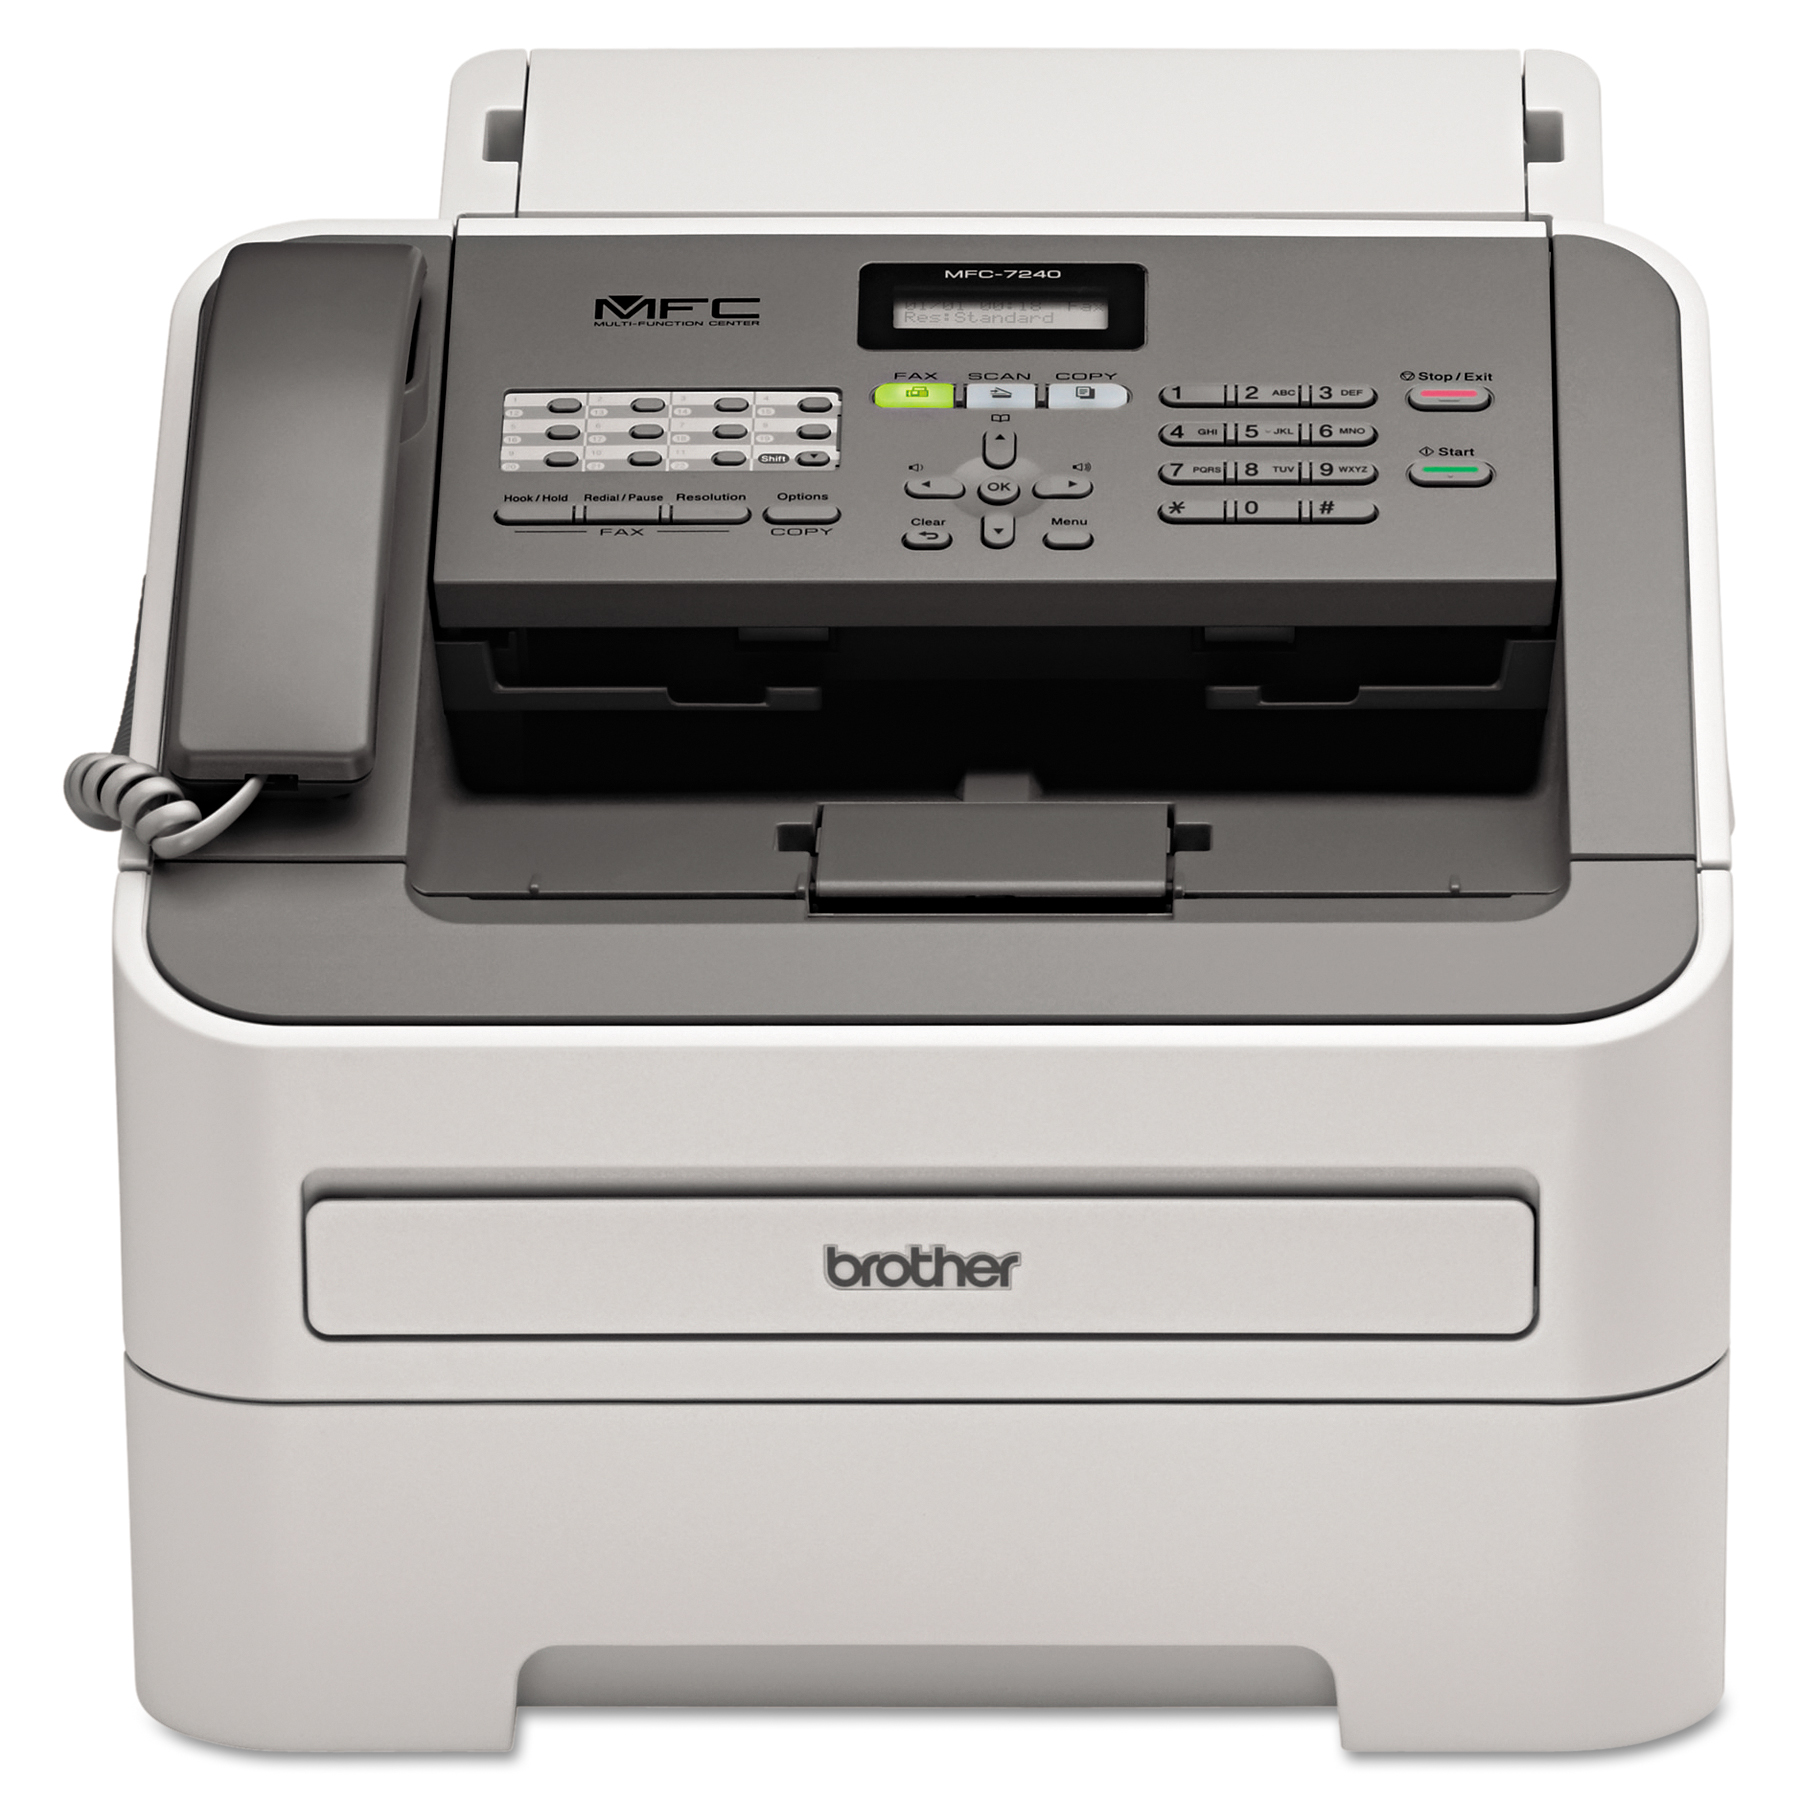 Brother BRTMFC7240 MFC-7240 All-in-One Laser Printer, Copy/Fax/Print/Scan